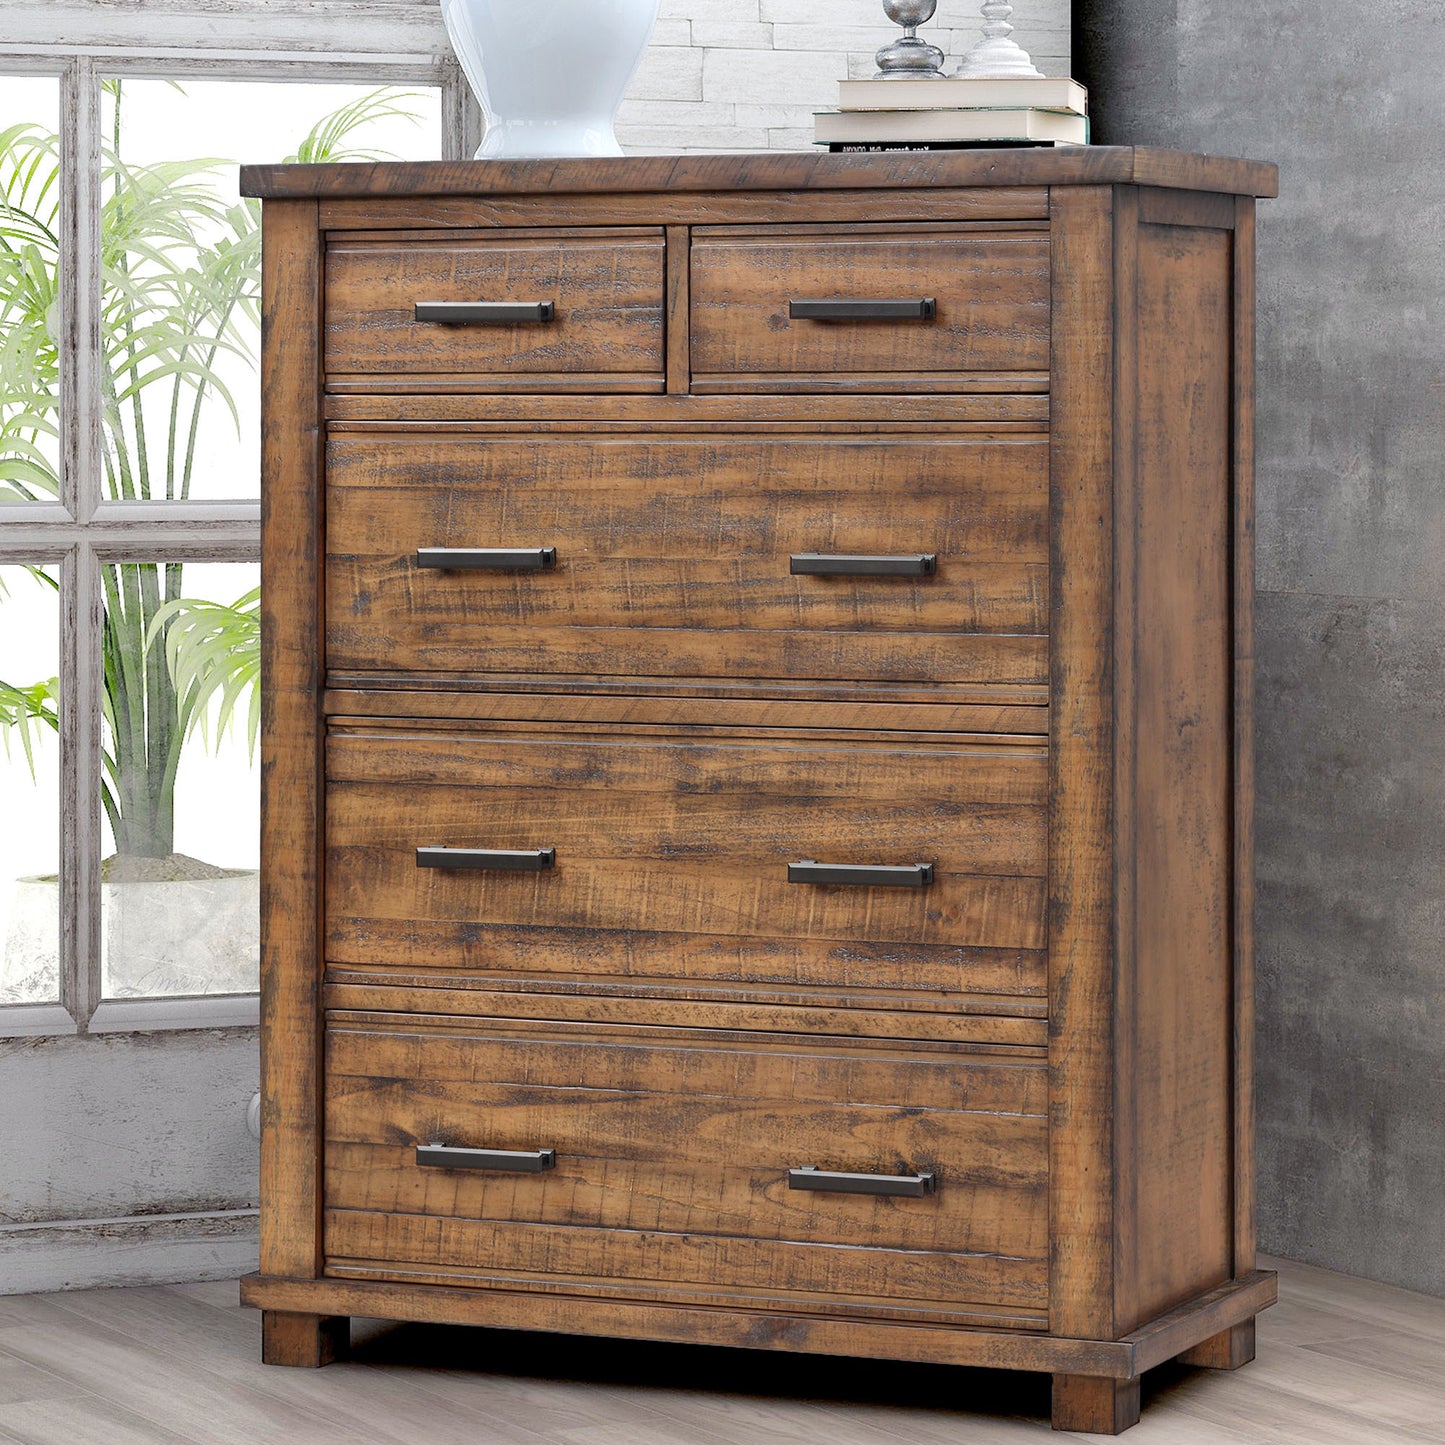 Rustic 5 Drawer Reclaimed Solid Wood Framhouse Chest Tallboy